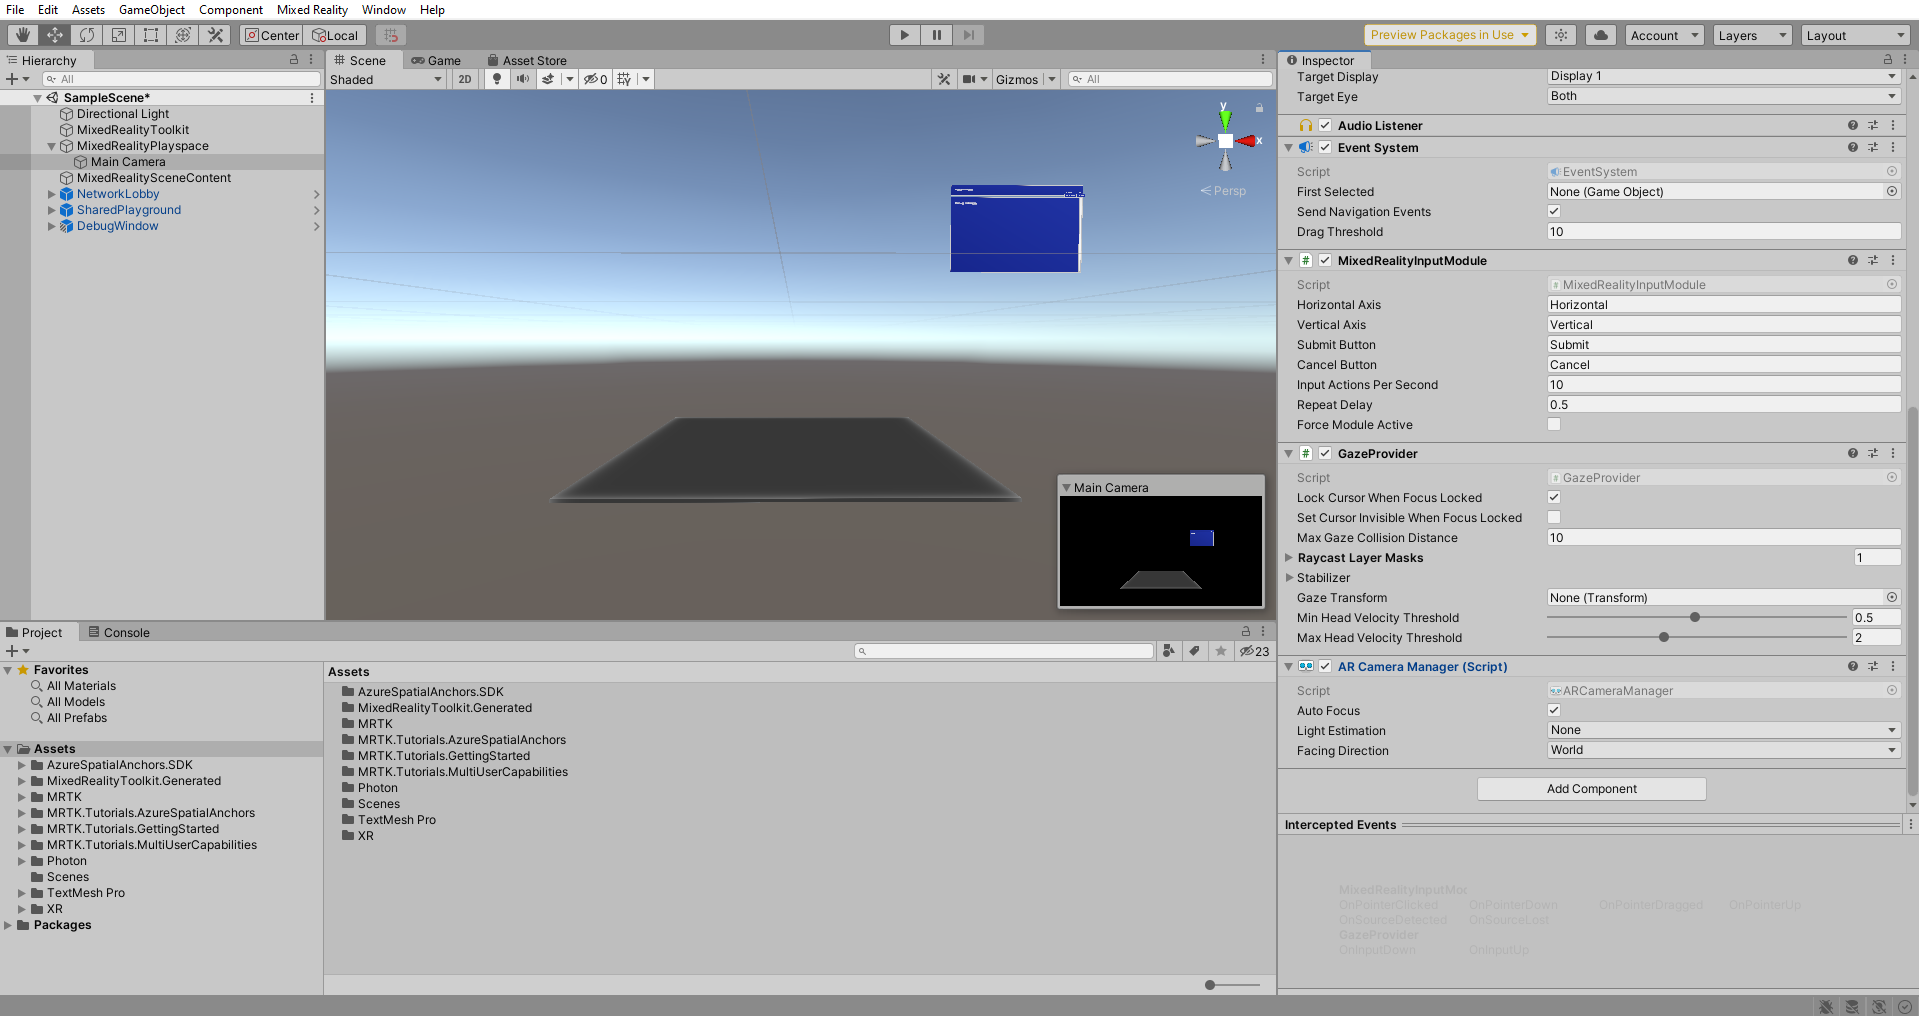 Unity with AR Camera Manager component partially configured